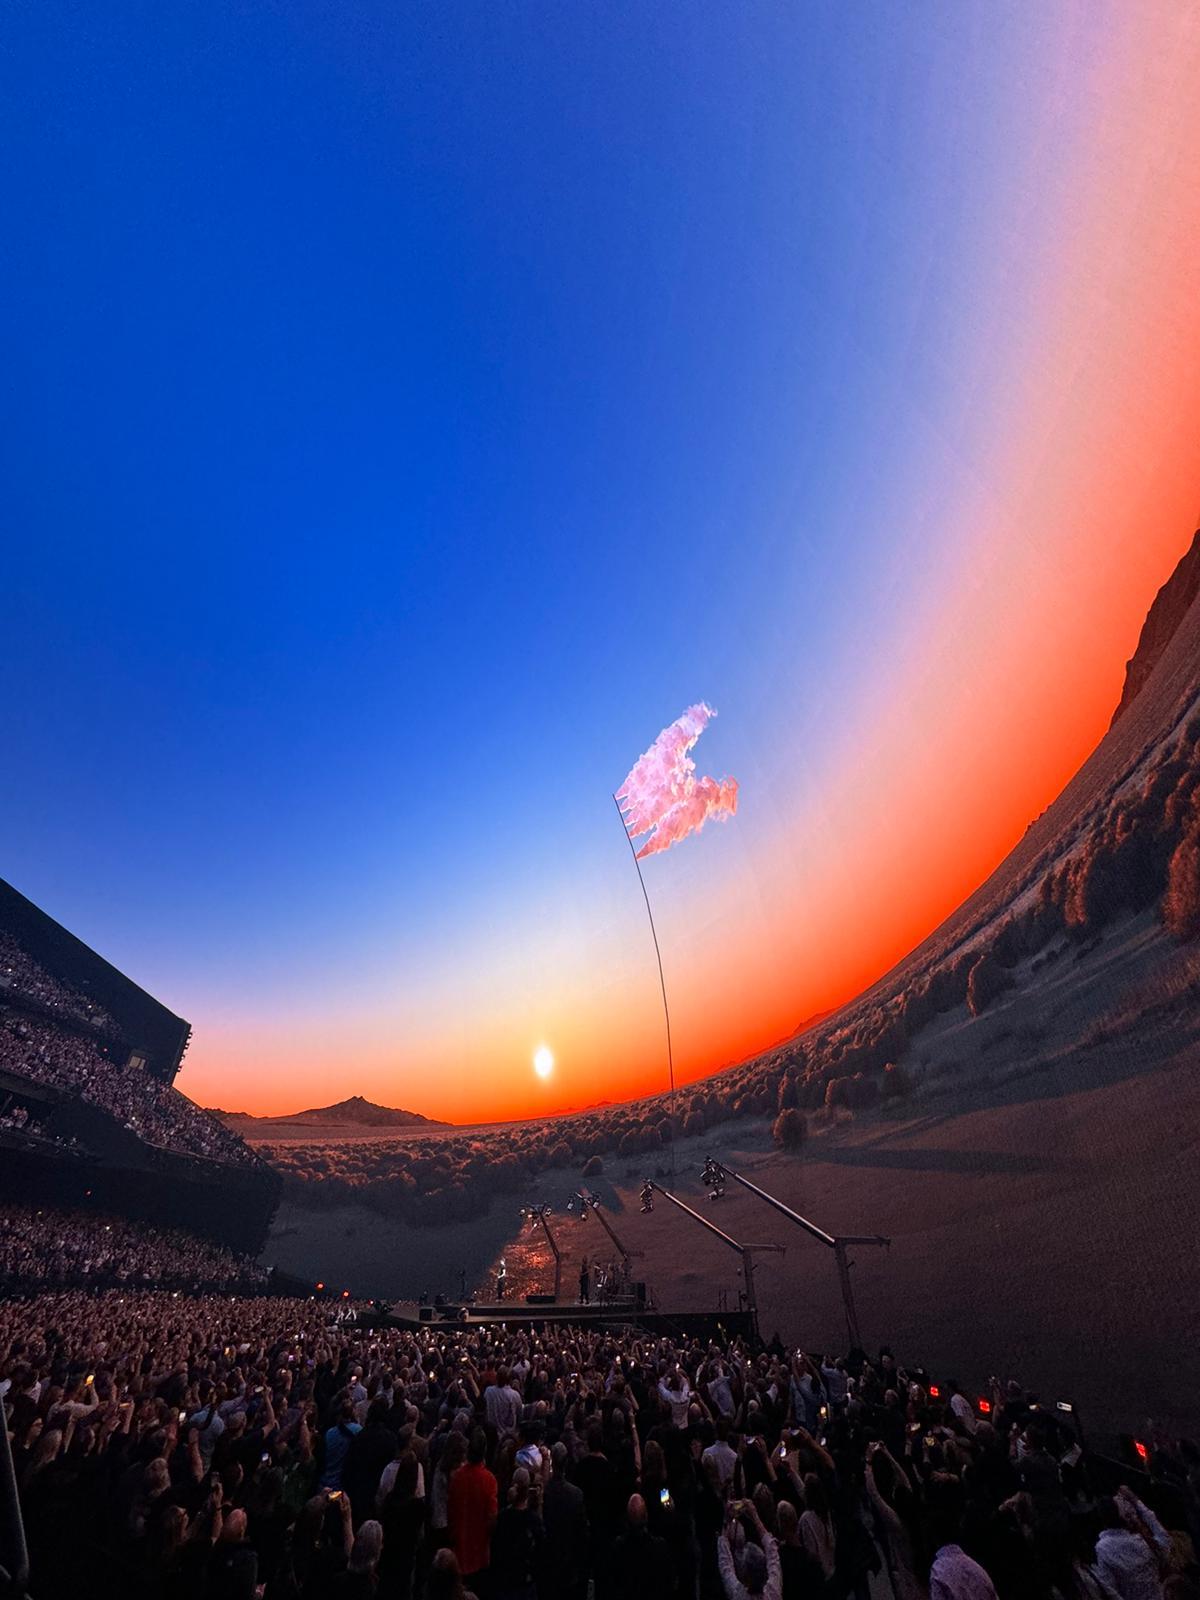 The interior of the U2Dome shows viewers a virtual desert landscape with a sunset in the sky